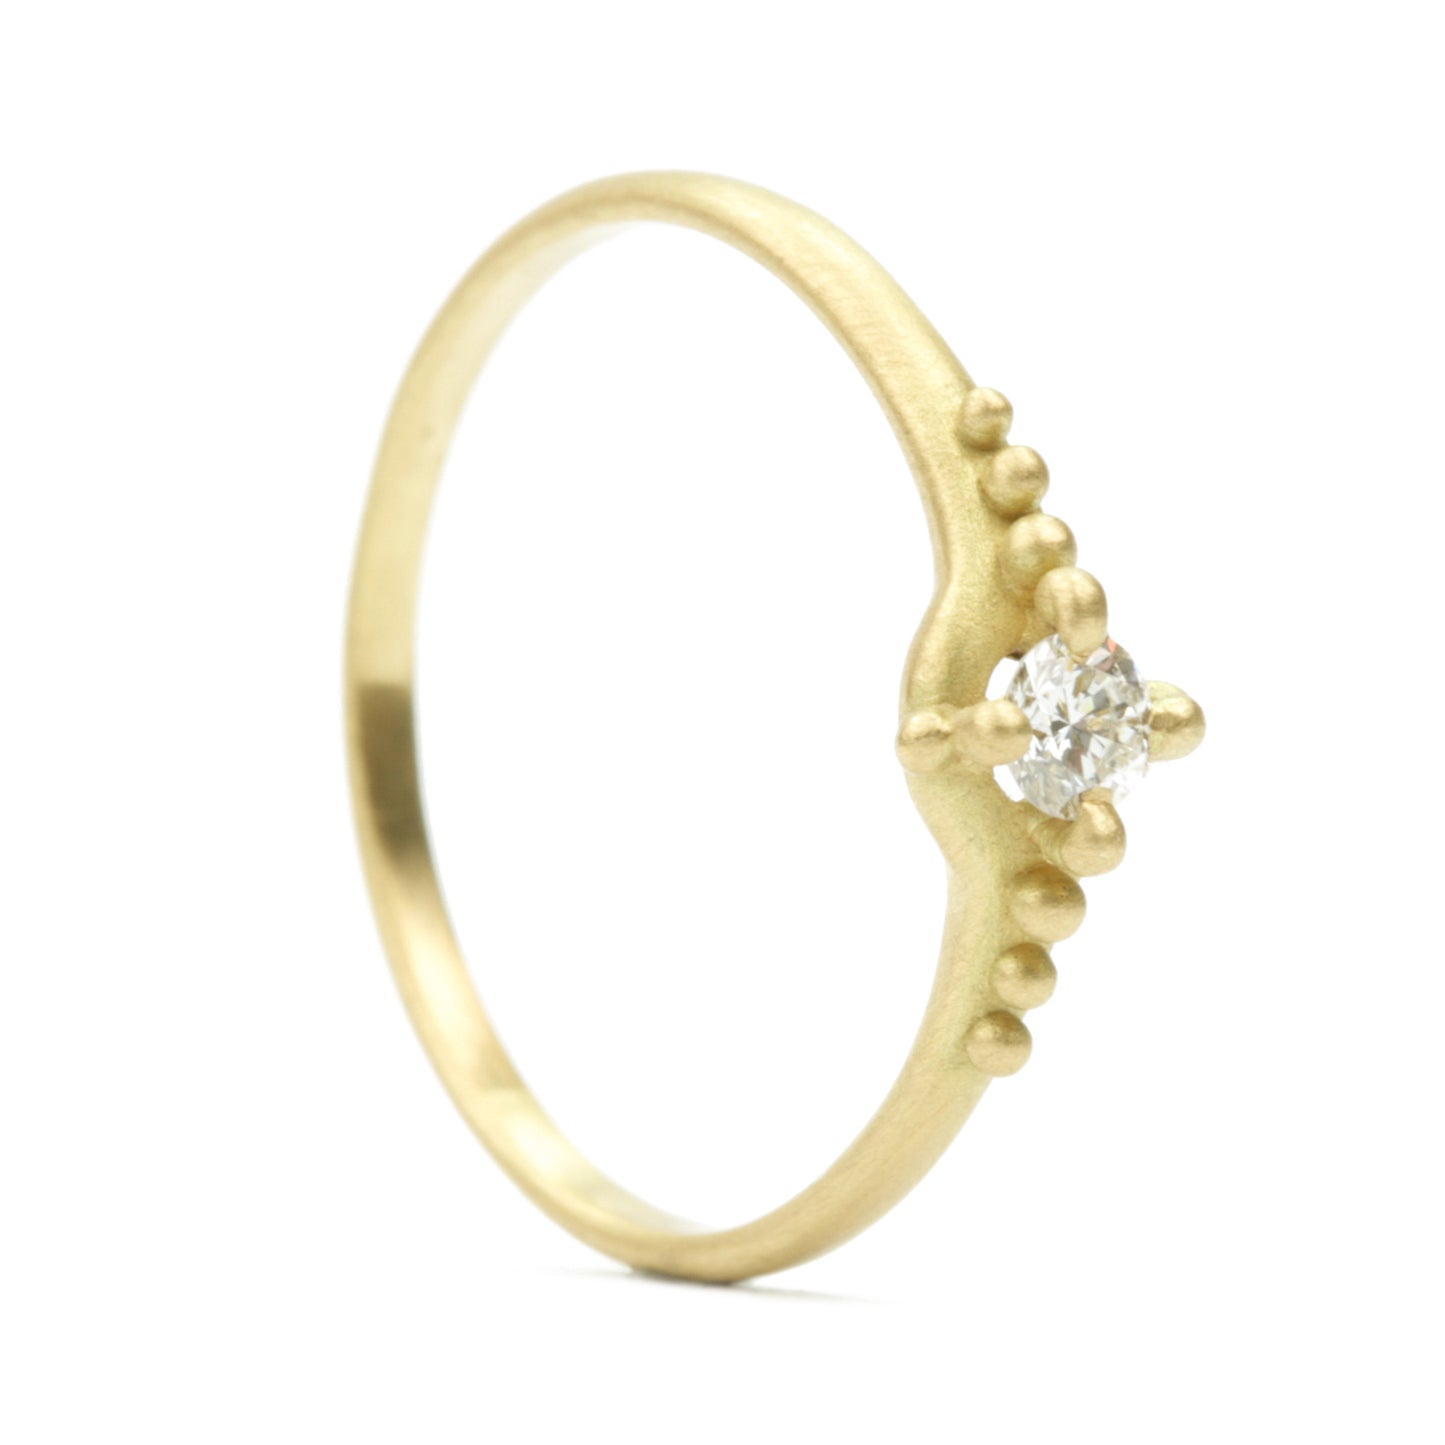 Ariel Ring with 3 mm diamond, side view